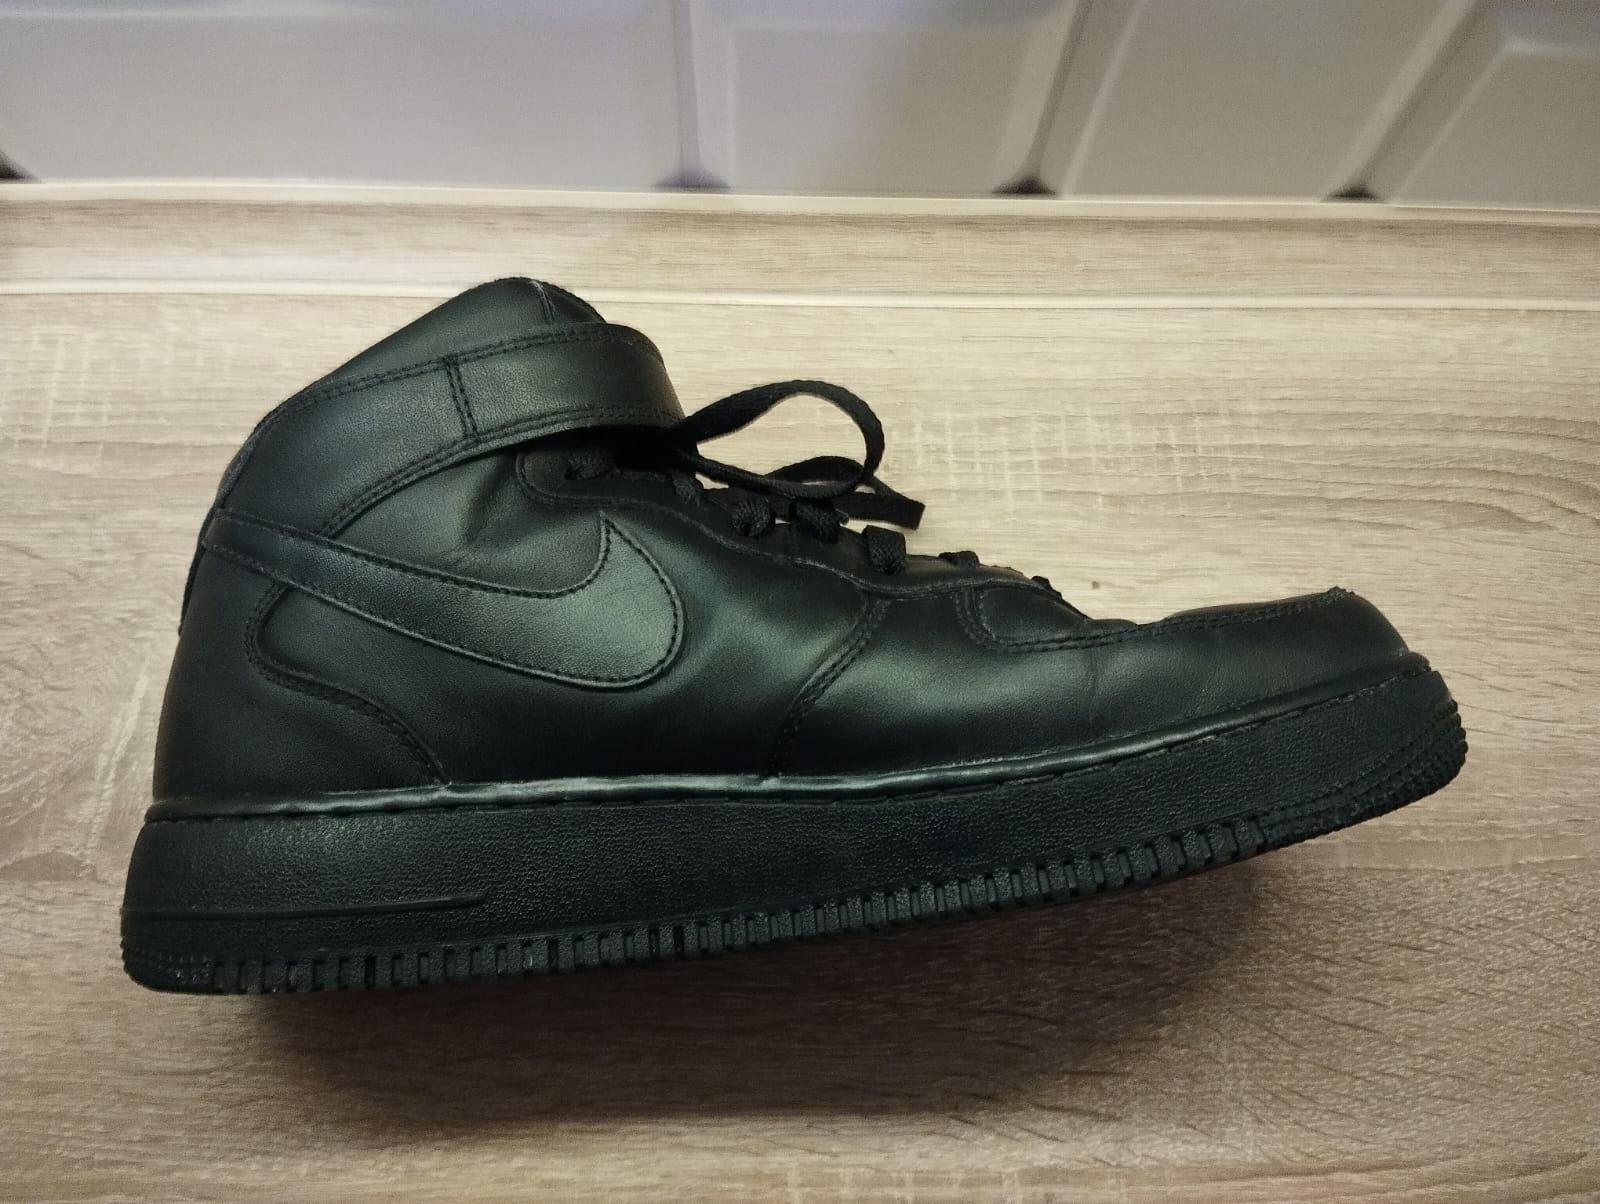 AIR FORCE 1 MID UNISEX - Sneakersy wysokie 43/27,5cm